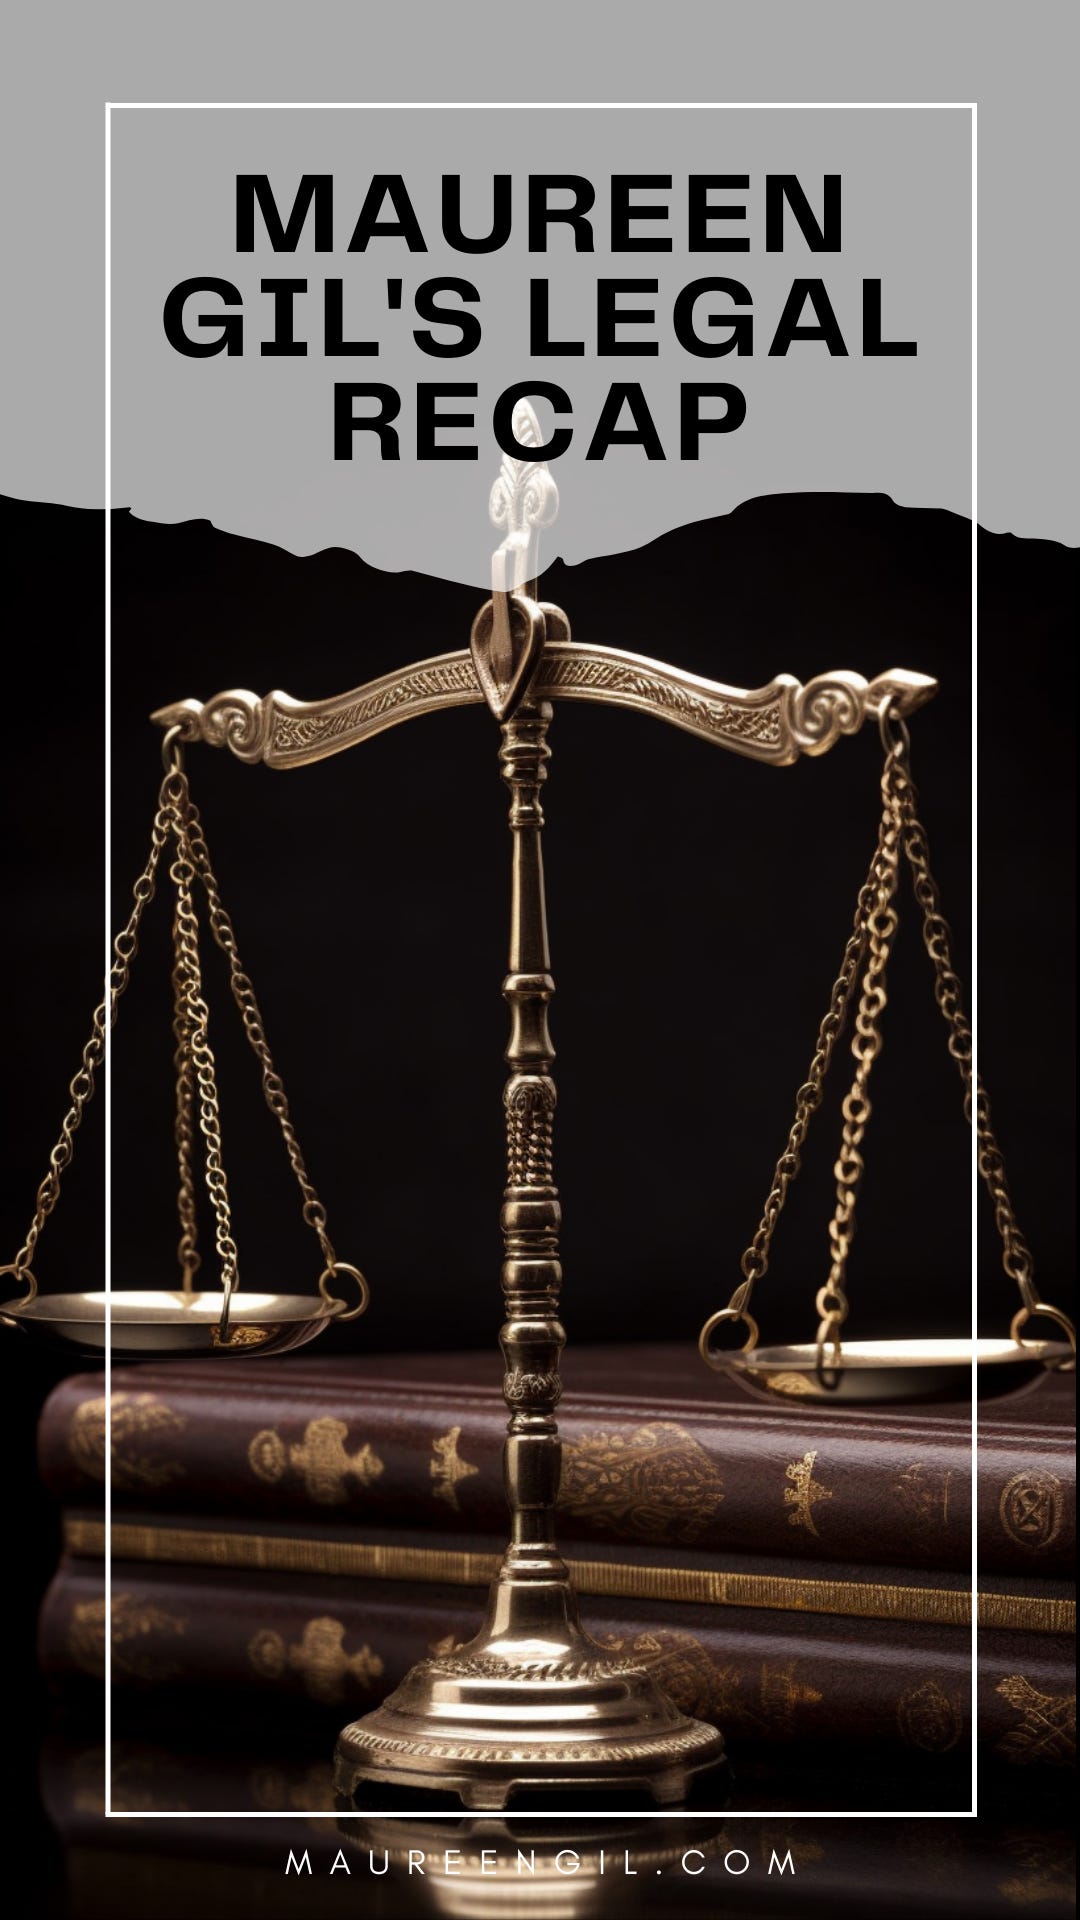  Stay up-to-date with the latest legal issues by reading this monthly recap.